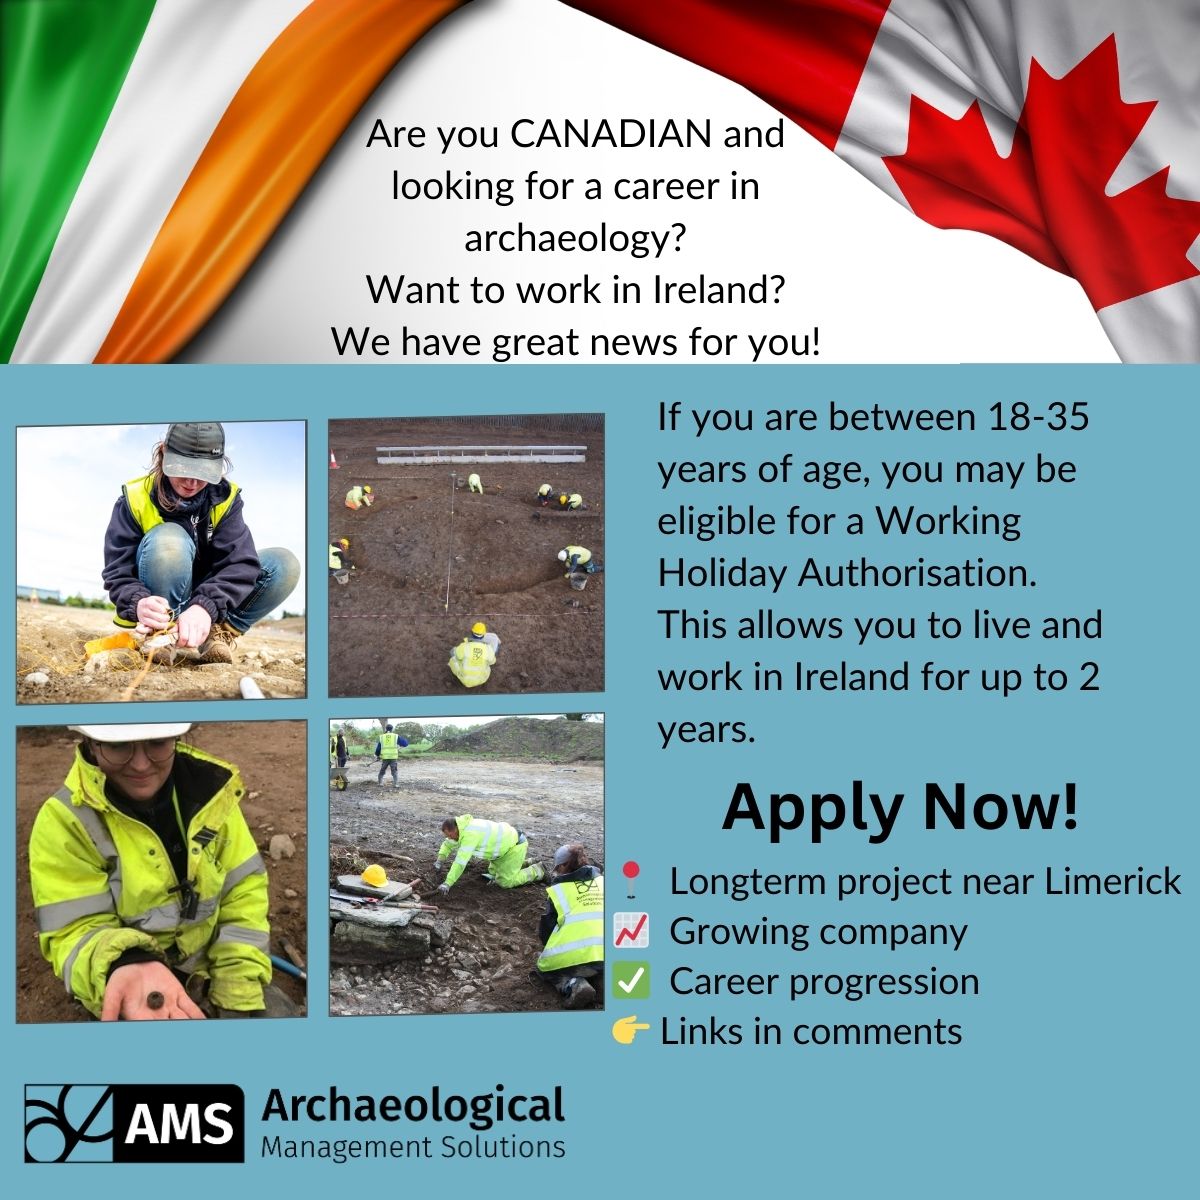 🍁Want to swap your maple leaf for a shamrock?☘️ You need to: ✅be between 18-35 years of age ✅have an archaeology or a related degree 👉apply for a Working Holiday Authorisation 📩Then send us an email with your CV to: jointheteam@ams-consultancy.com #workinireland #archeology